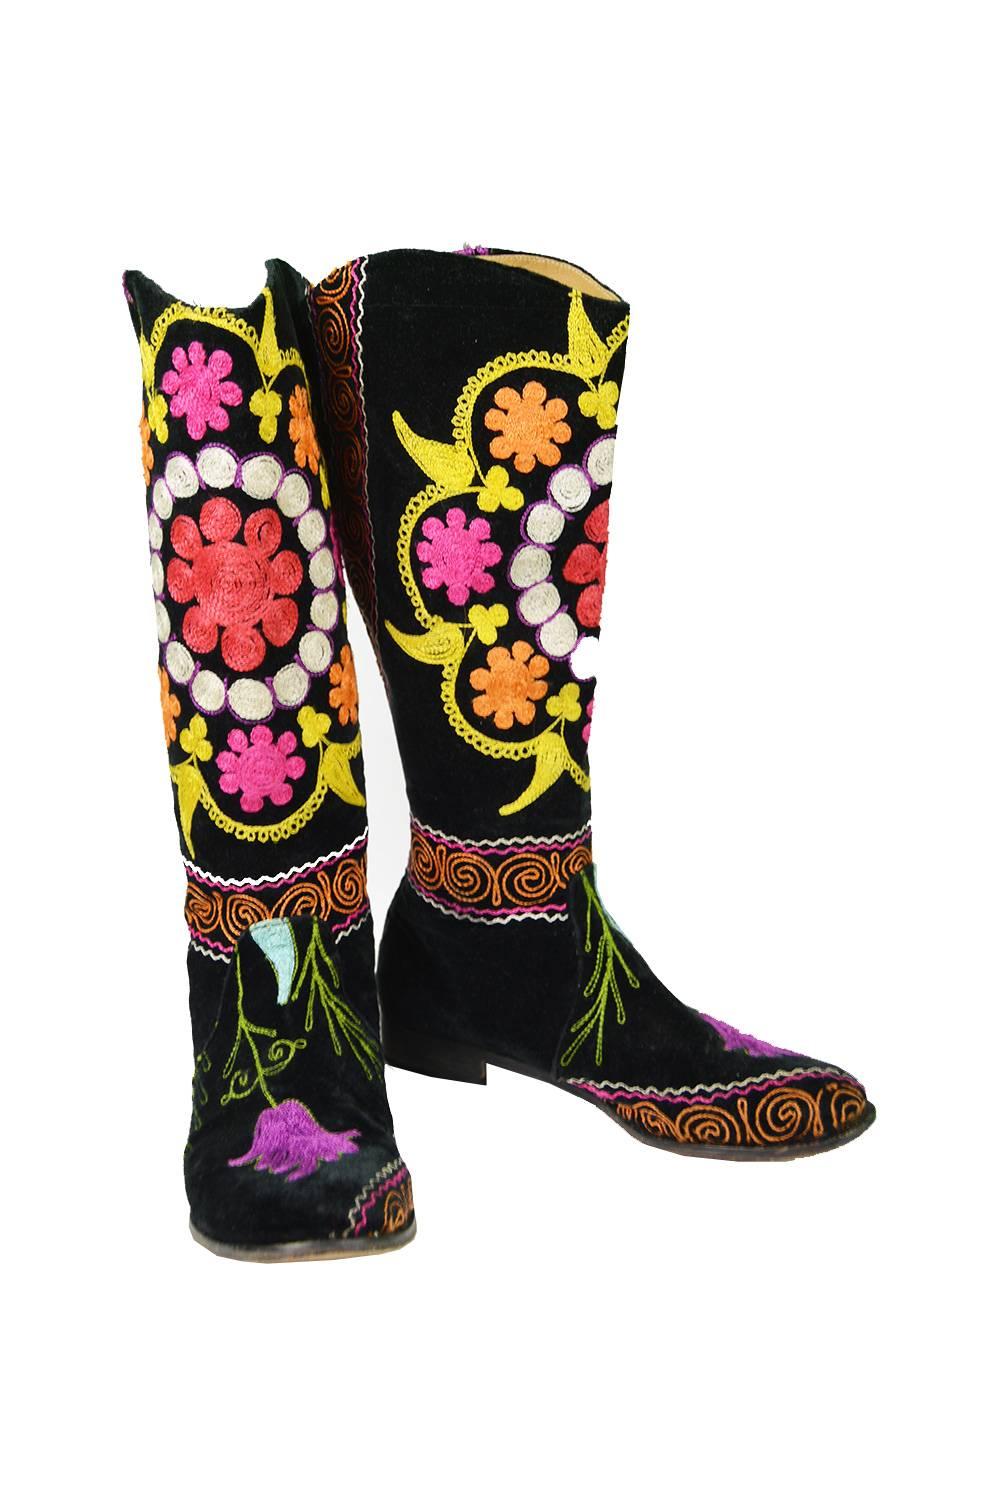 embroidered boots from turkey